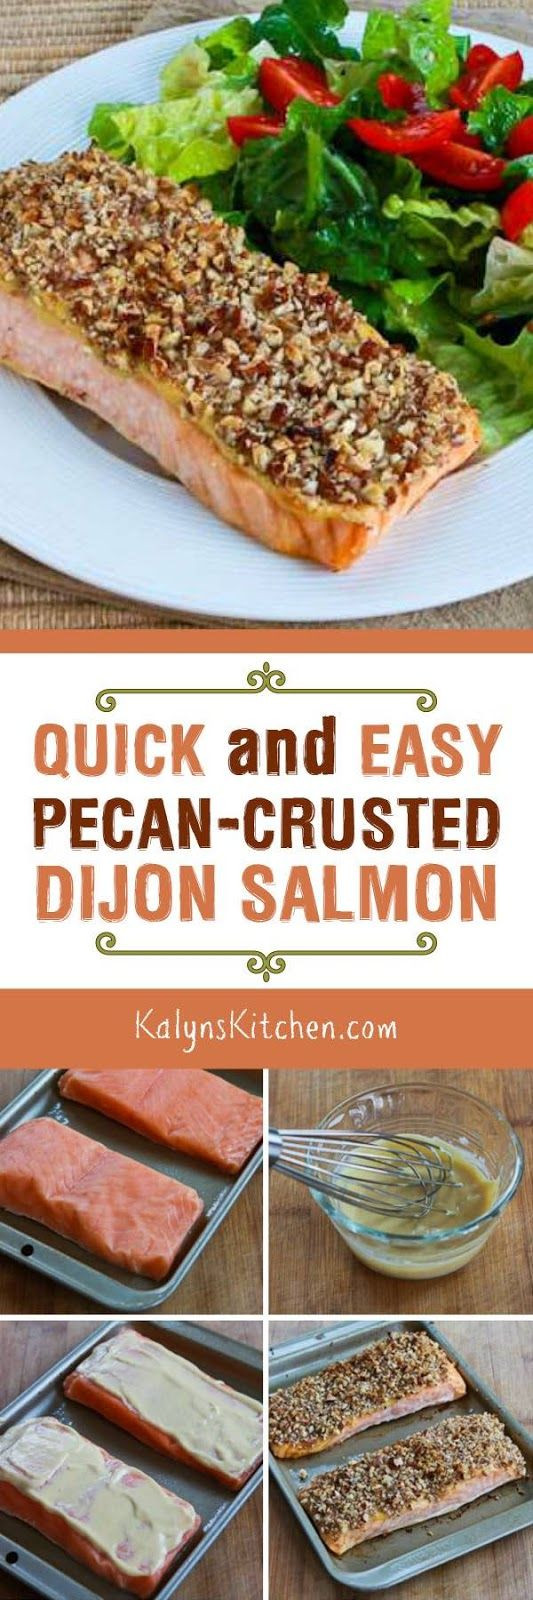 Low Cholesterol Salmon Recipes
 Quick and Easy Low Carb Pecan Crusted Dijon Salmon